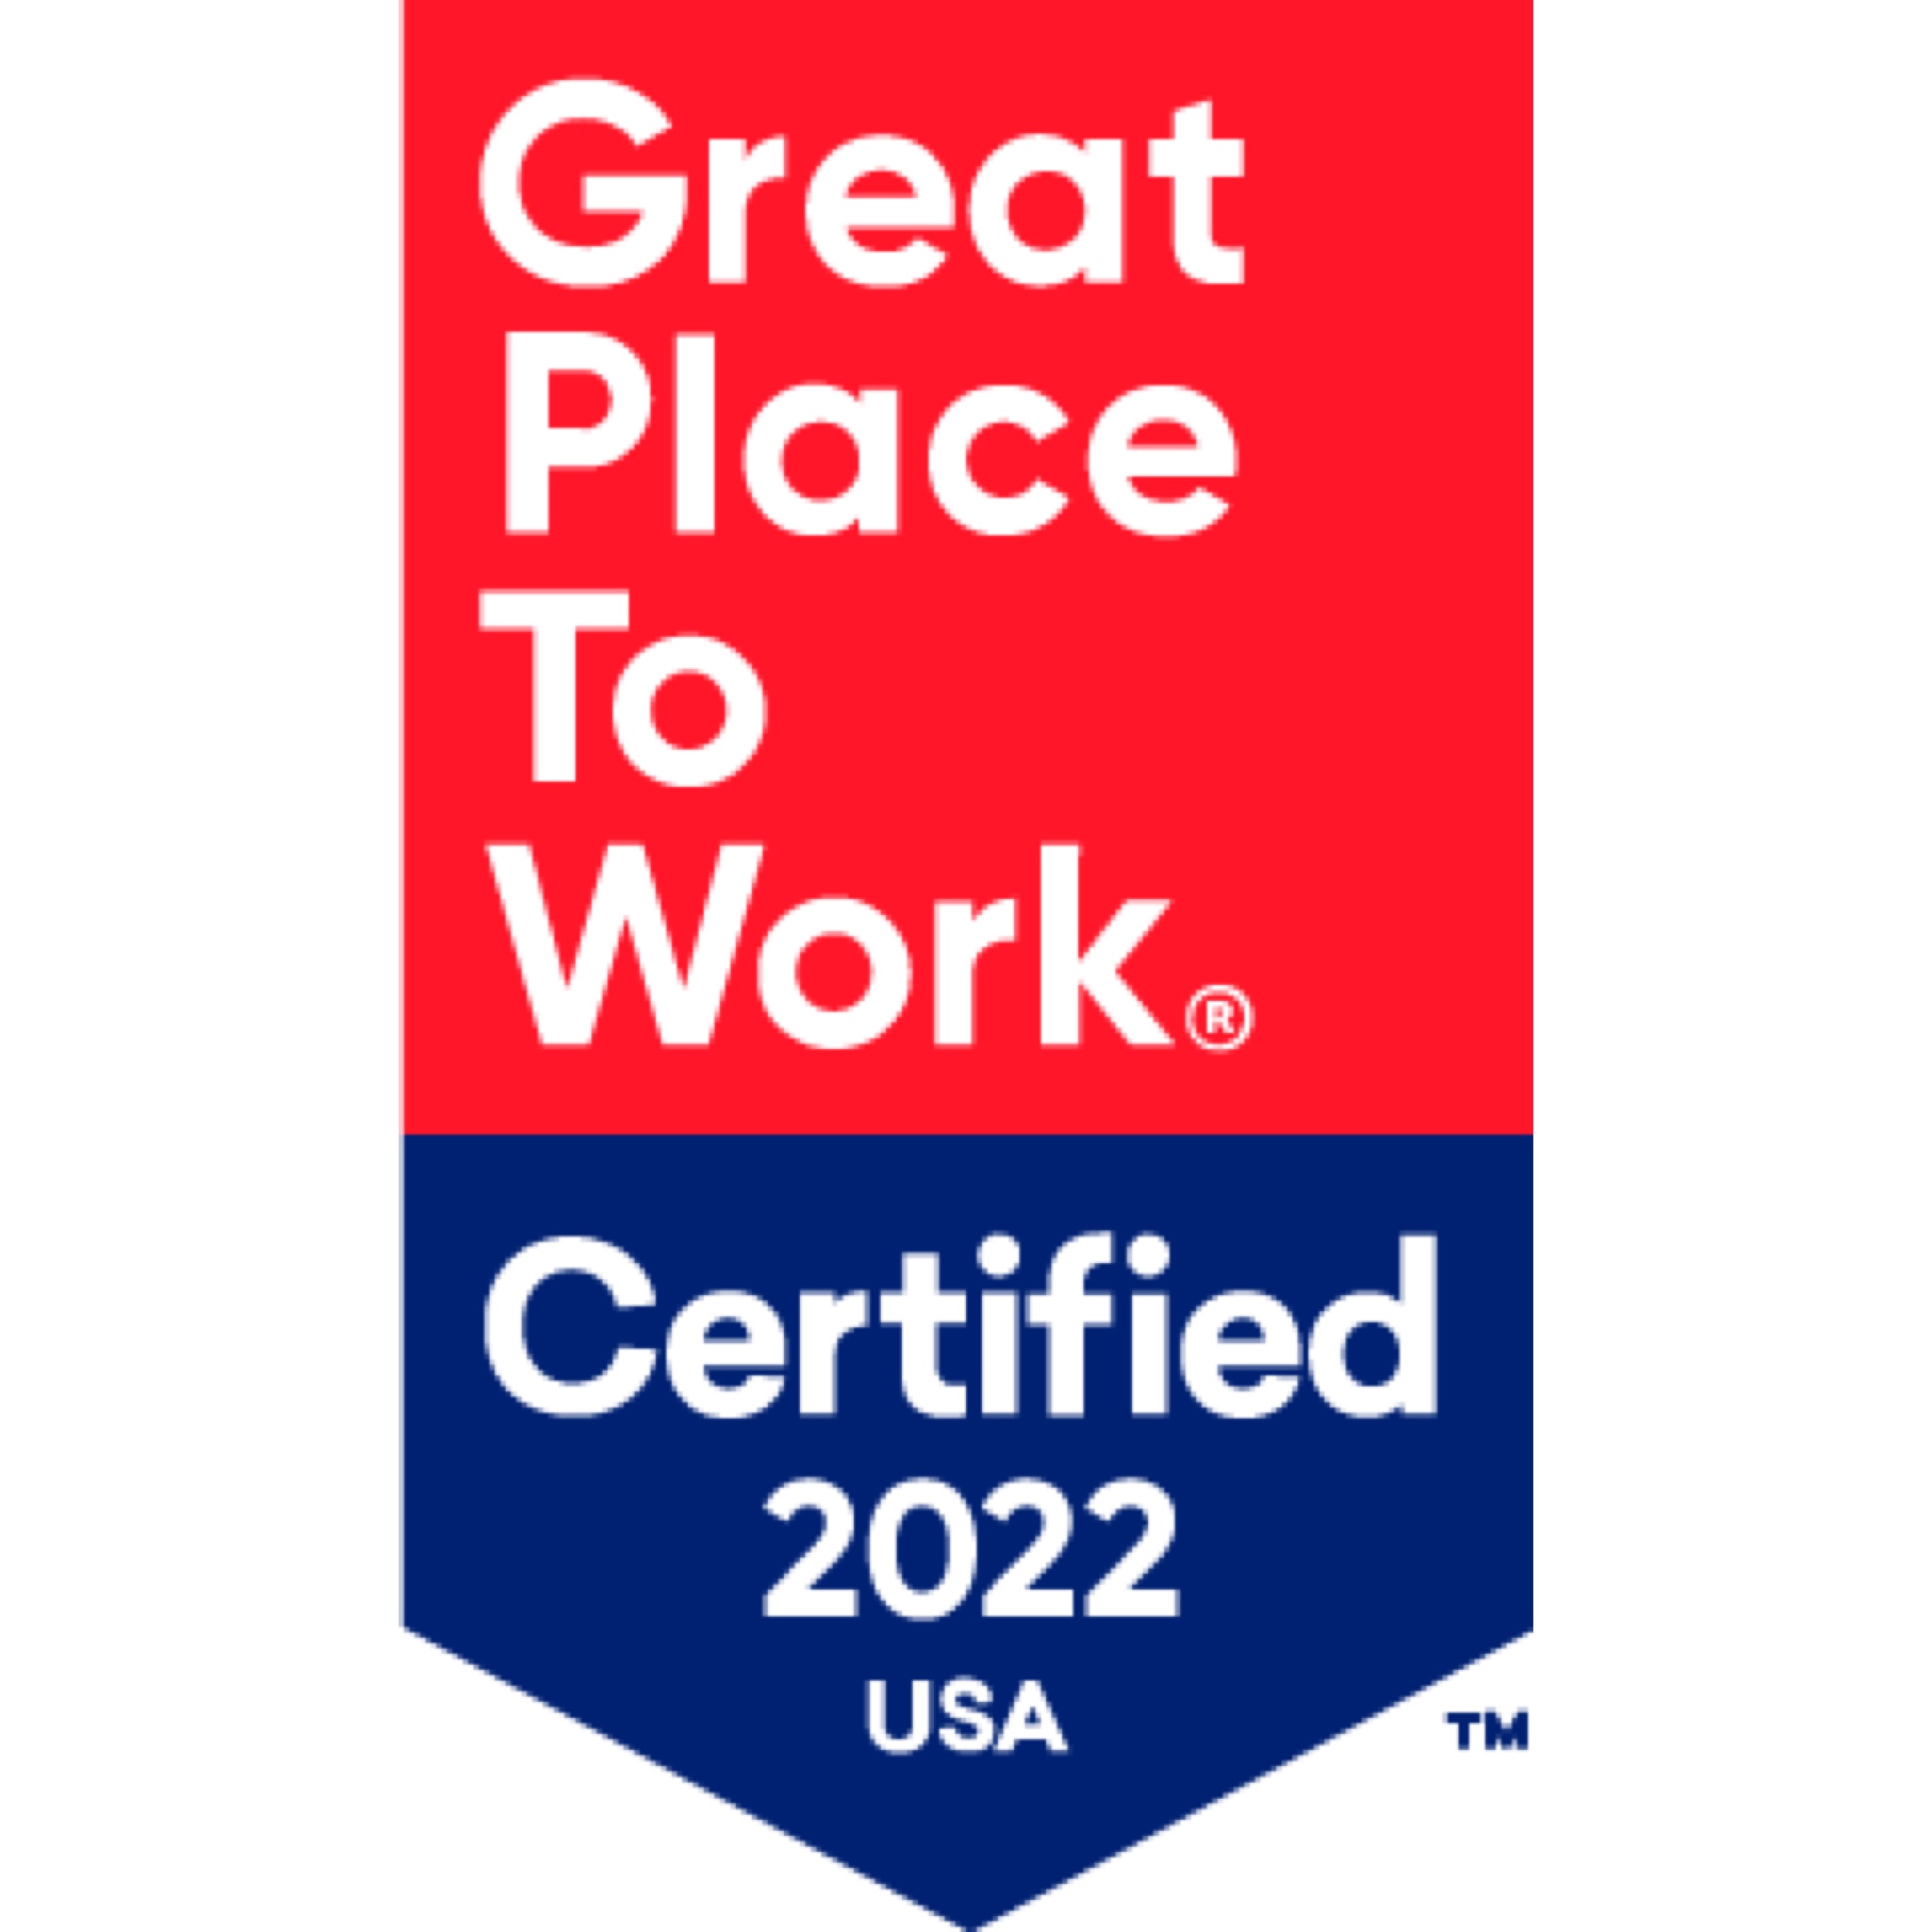 La agencia Altered State Productions de United States gana el premio Great Places to Work - Certified 2022 USA